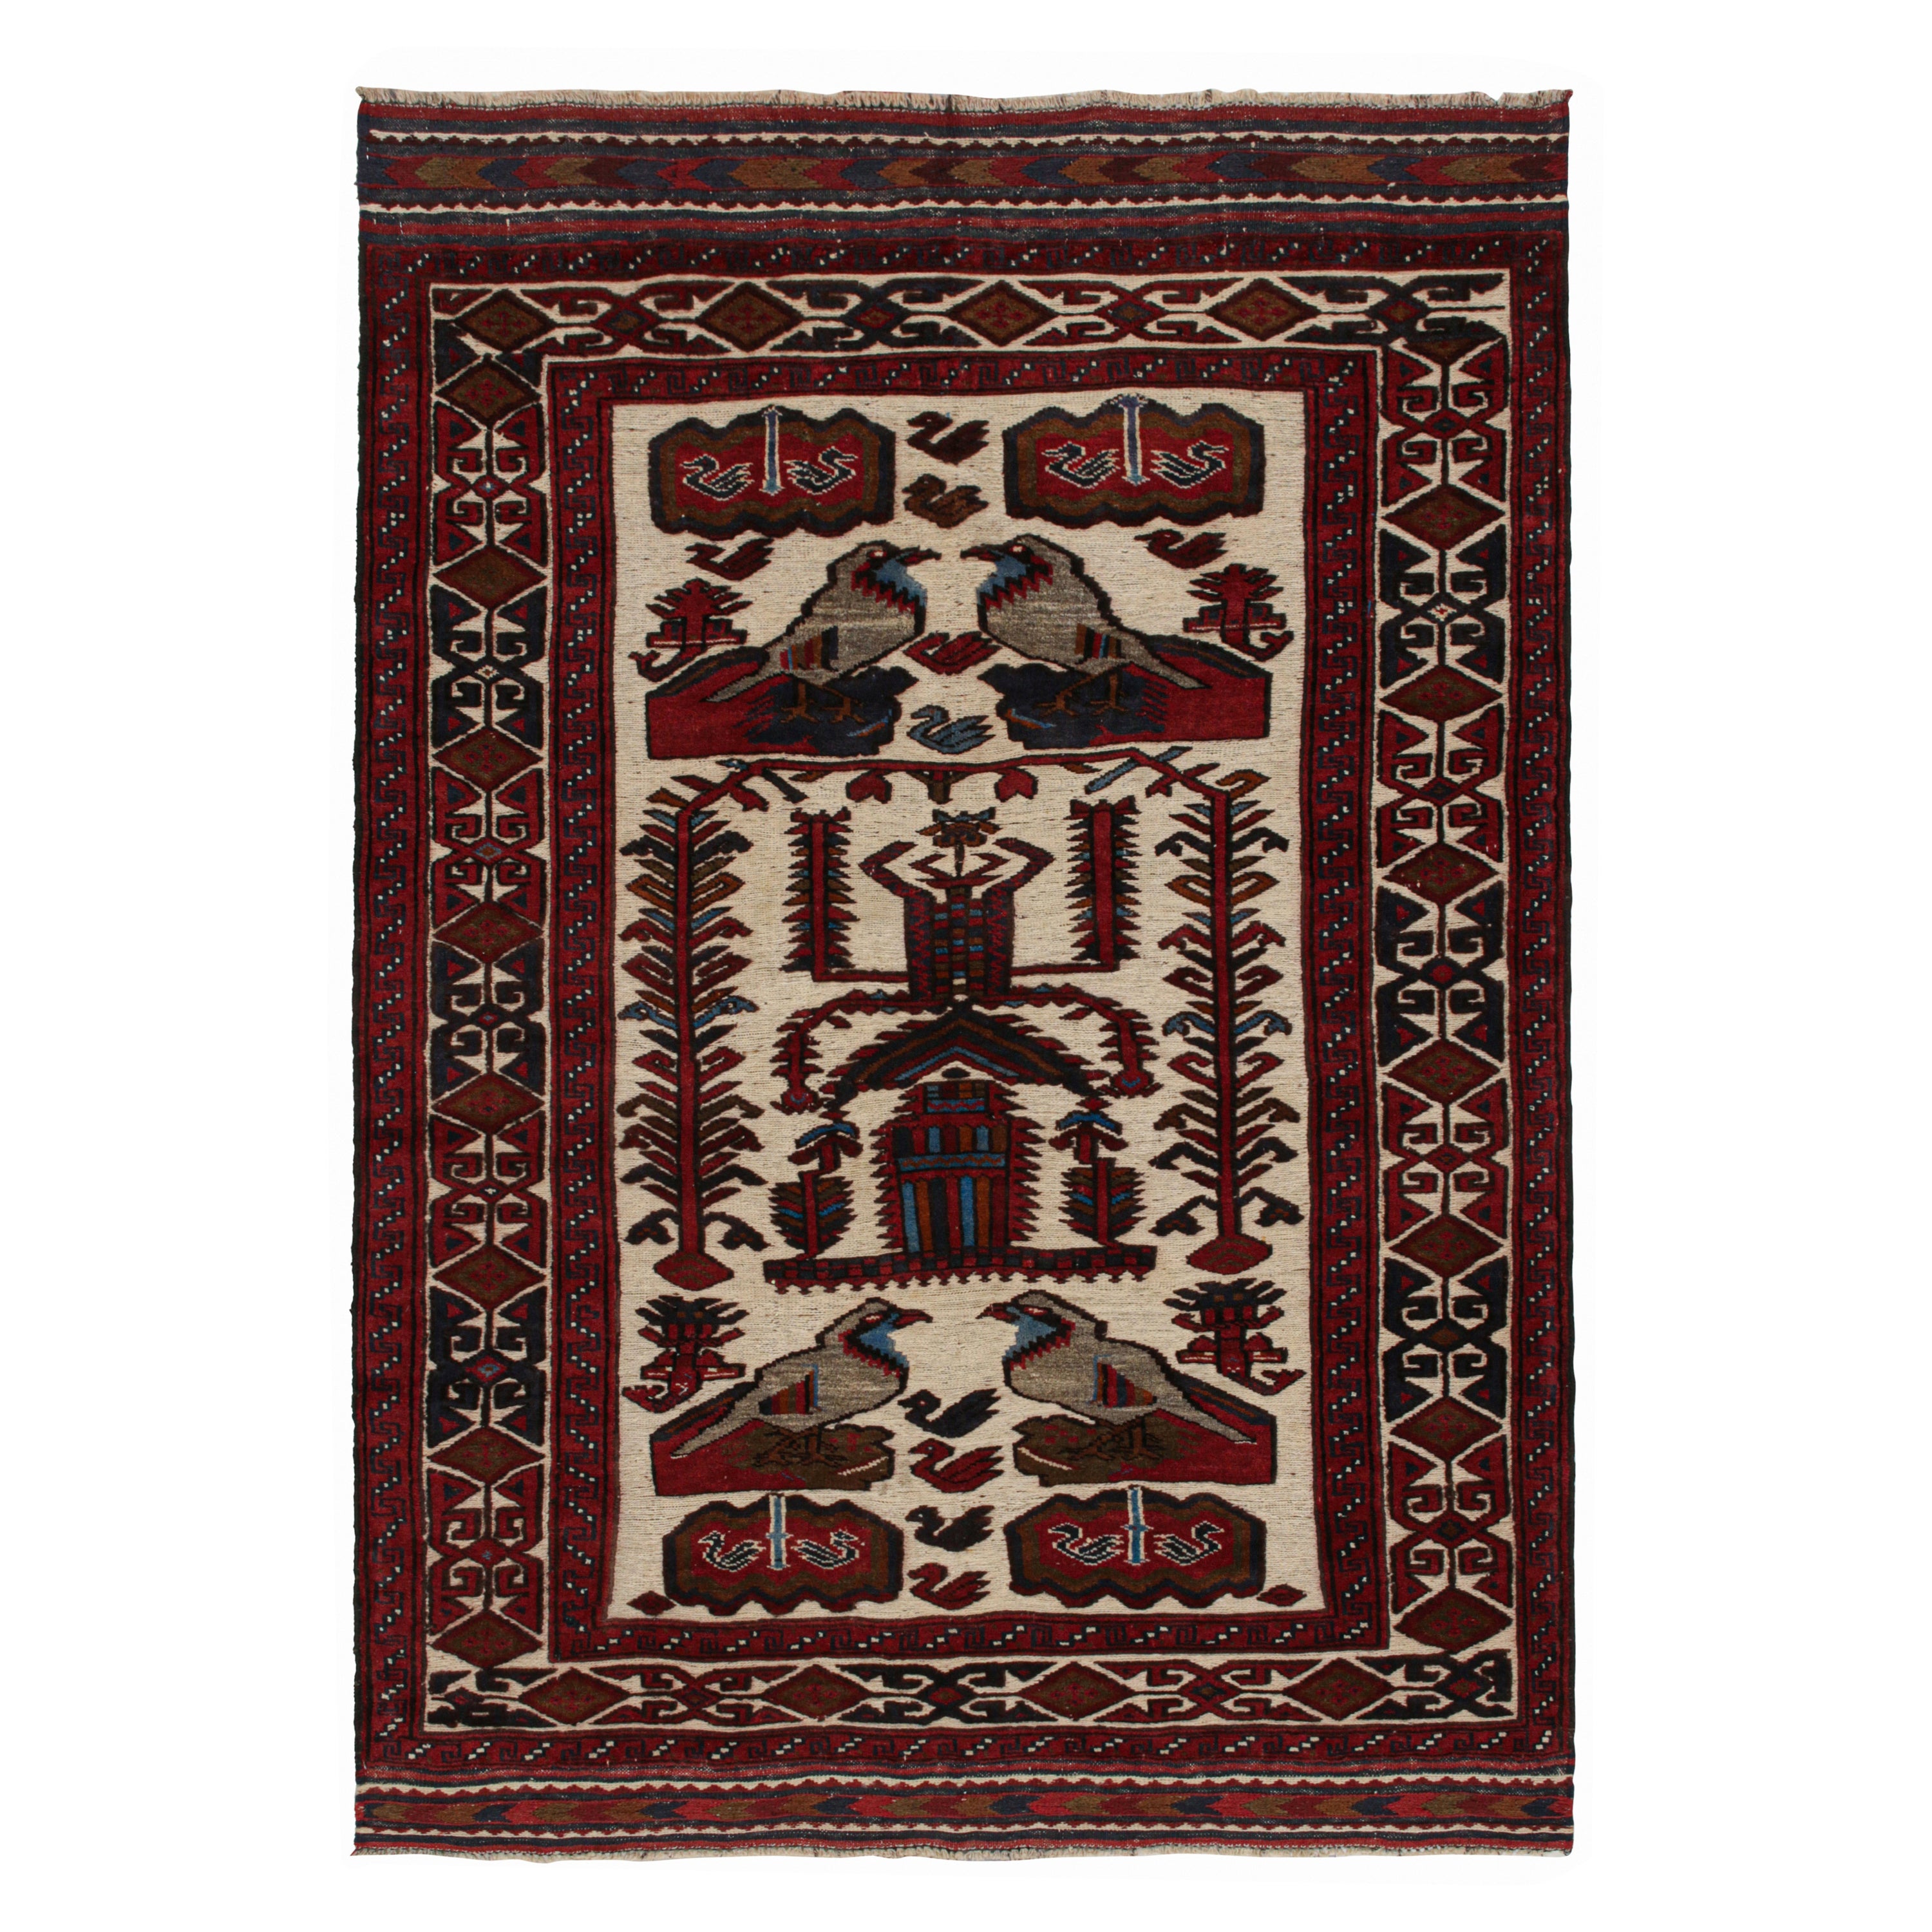 Rug & Kilim’s Persian Barjasta style rug in Beige & Red with Bird Pictorials  For Sale